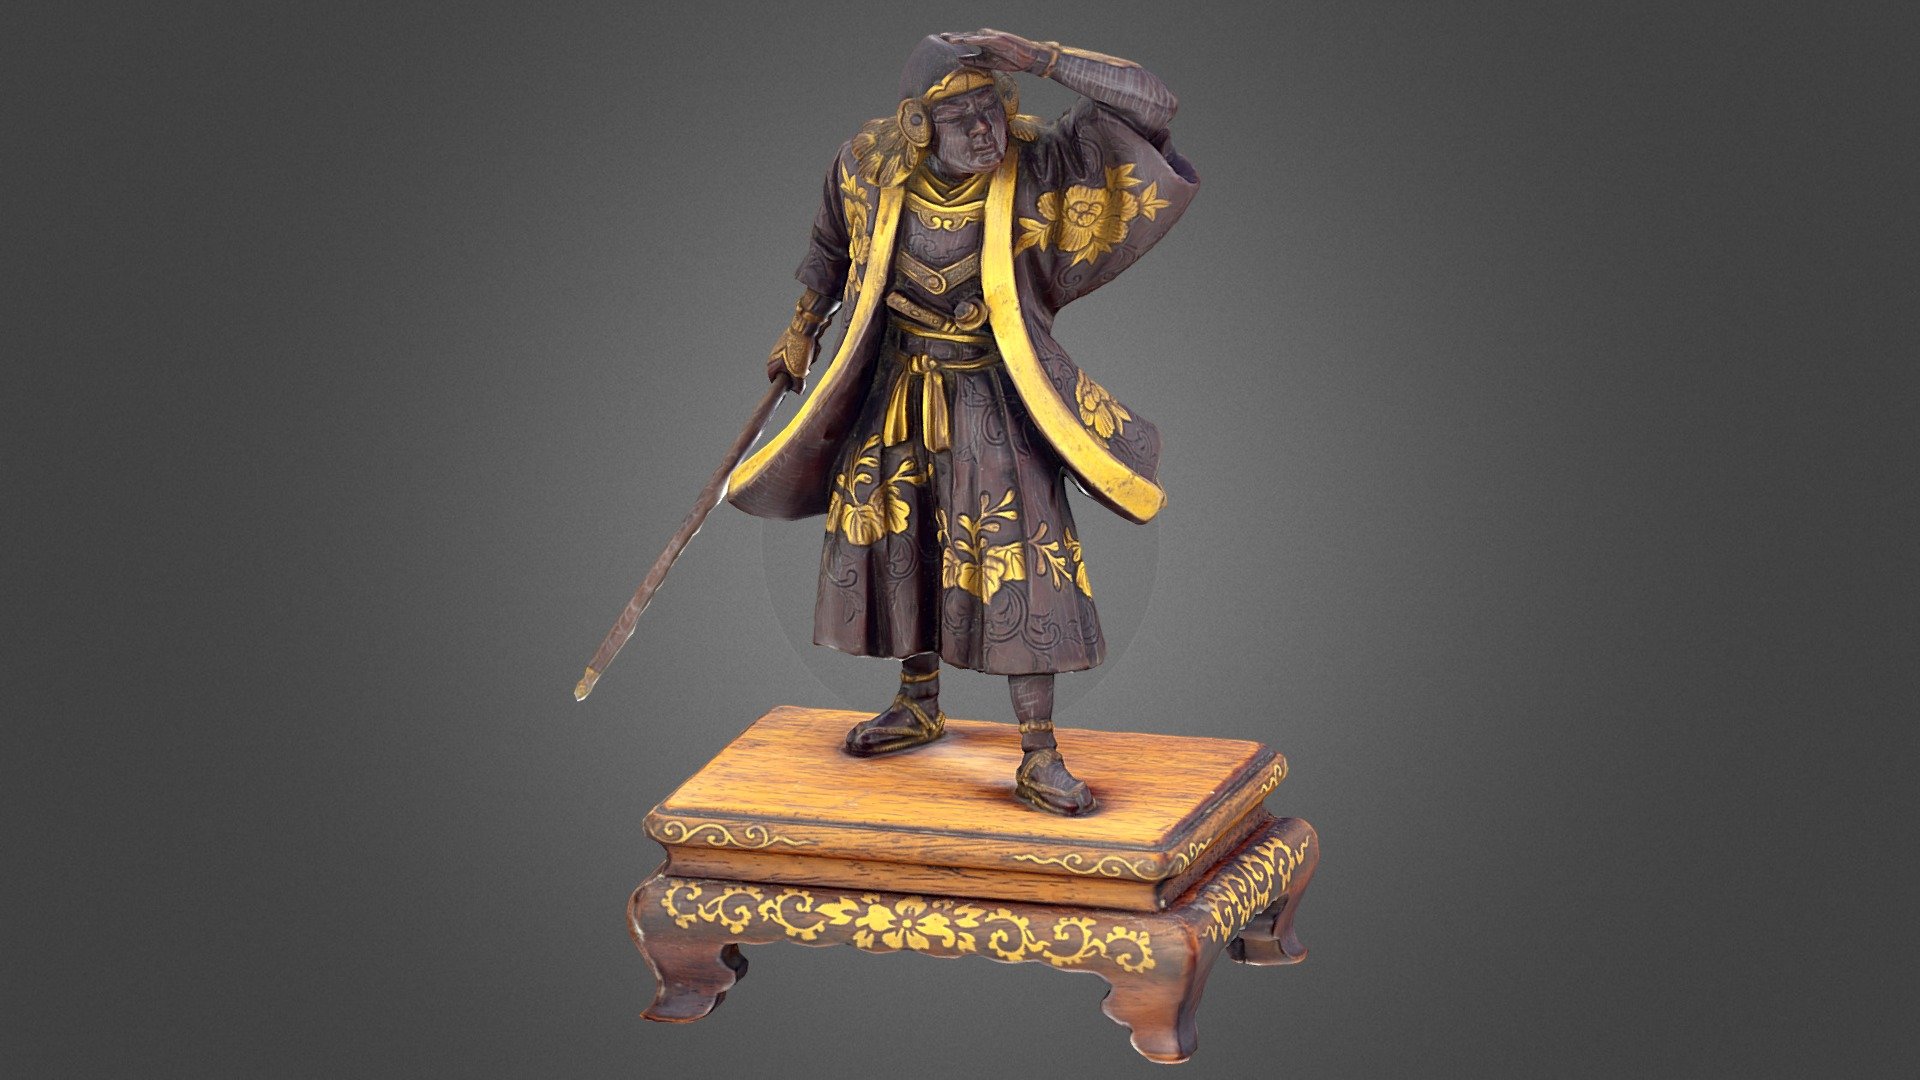 Meiji Period (1868-1912), signed Miayo.

The figure wearing decorated robes, standing with one hand raised looking into the distance, the other hand clasping a spear. Mounted on a rectangular lacquered wood stand. Height 7 1/2 inches. 

Created in RealityCapture by Capturing Reality from 980 images 3d model